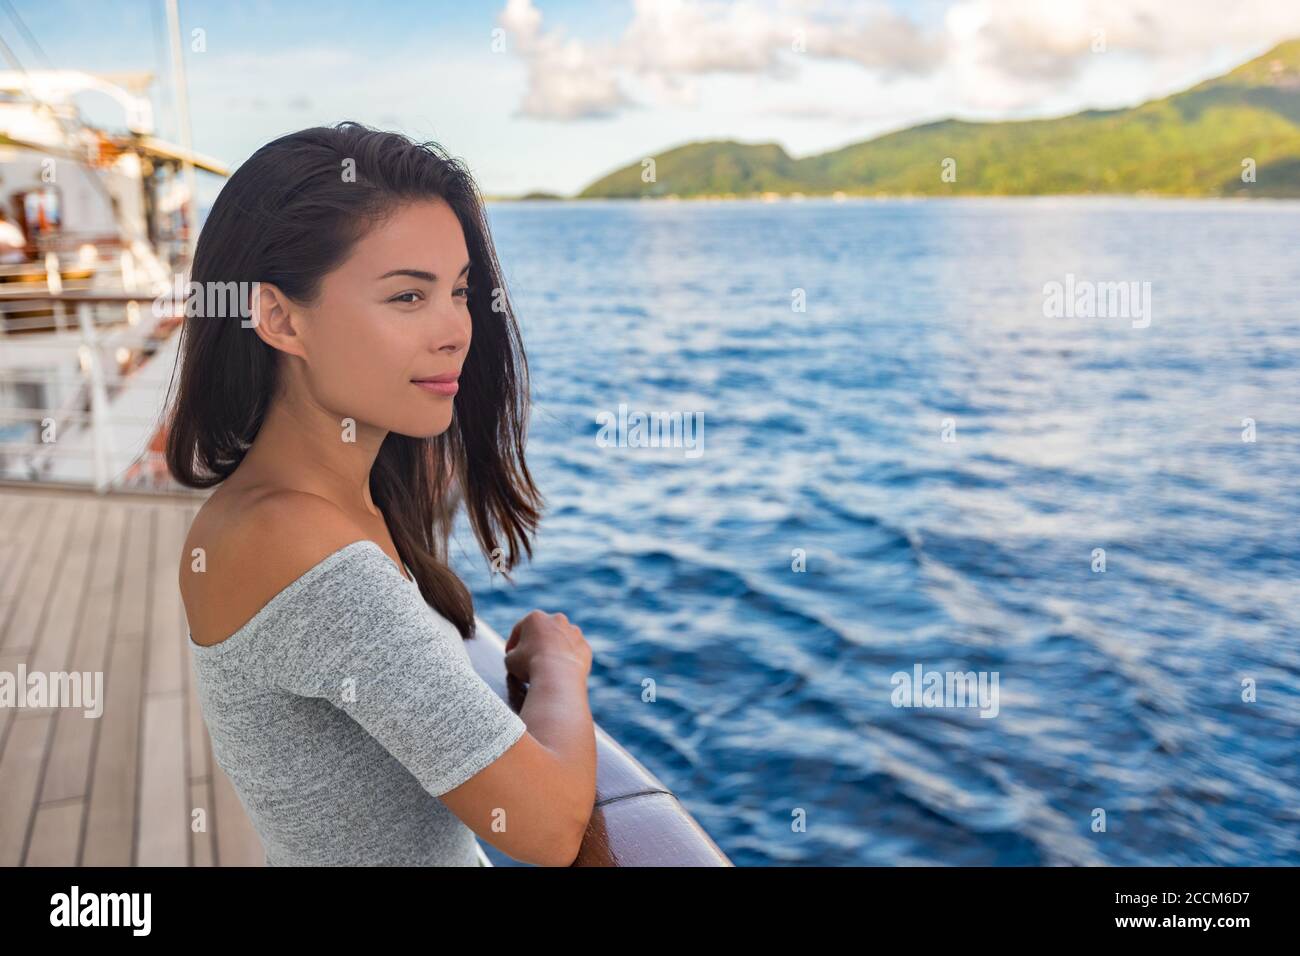 Cruise Ship Luxury Vacation Travel Woman Boat Passenger Looking At